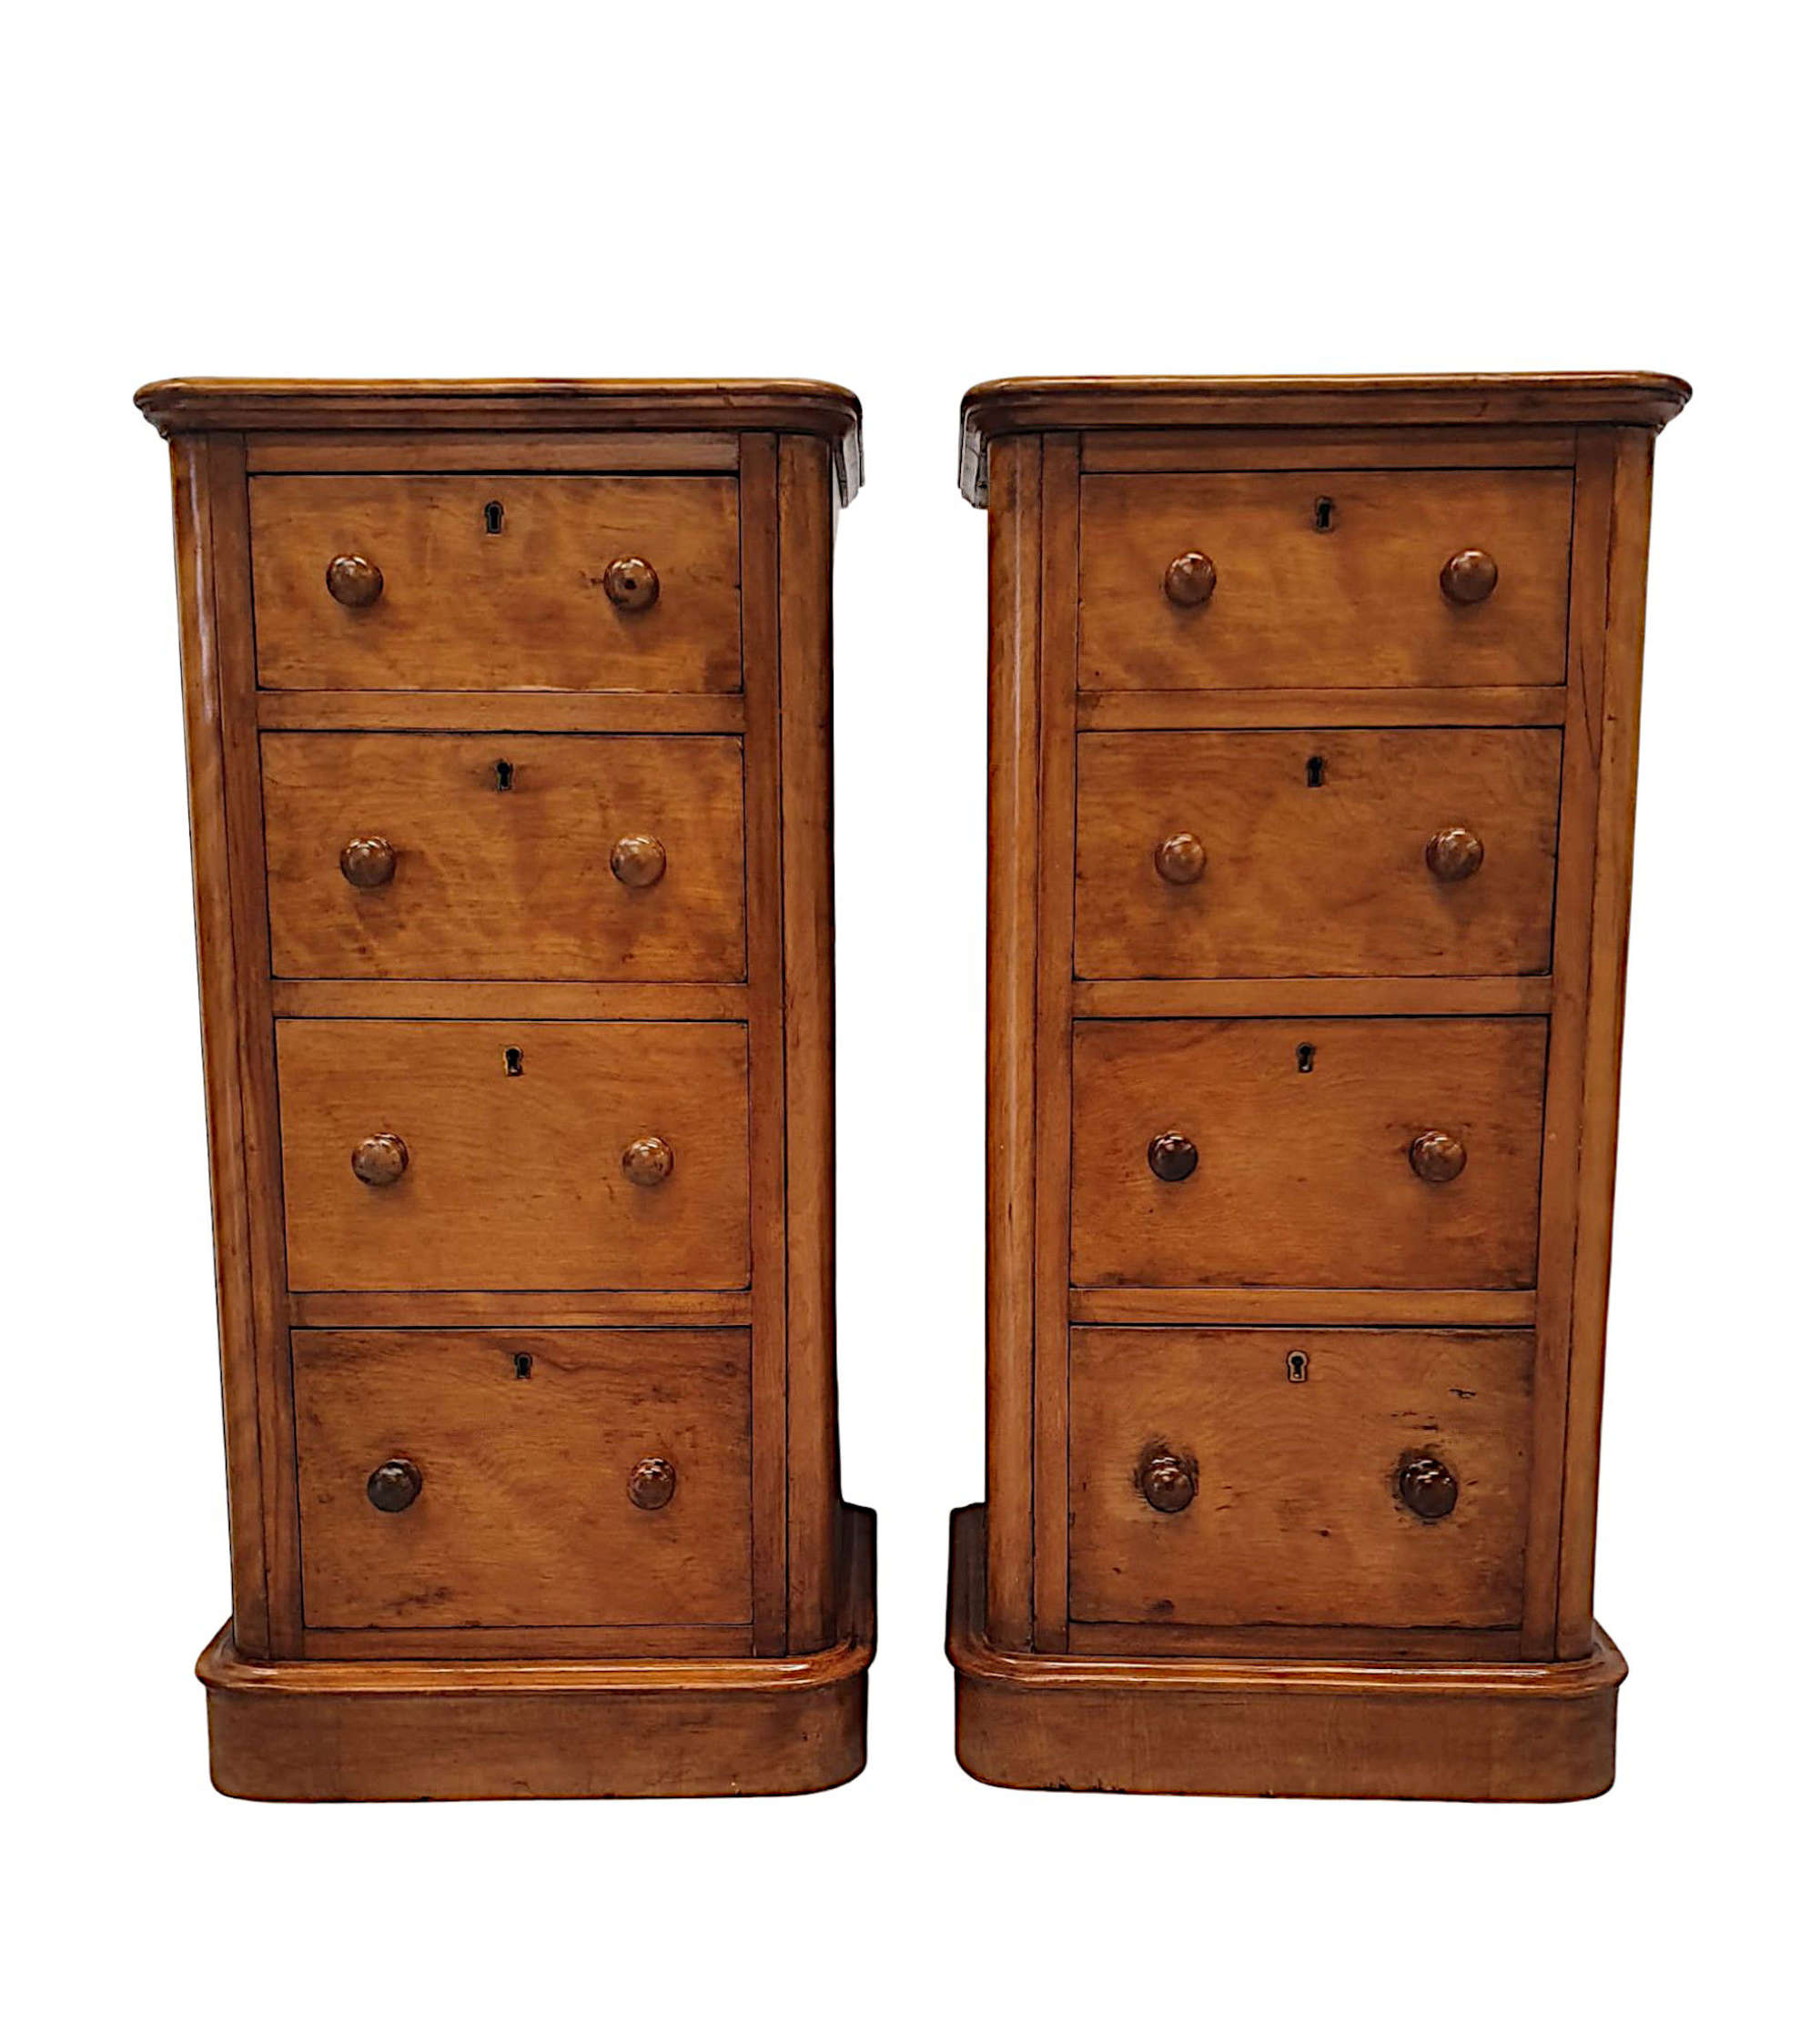 A Gorgeous Pair of 19th Century Bedside Chests